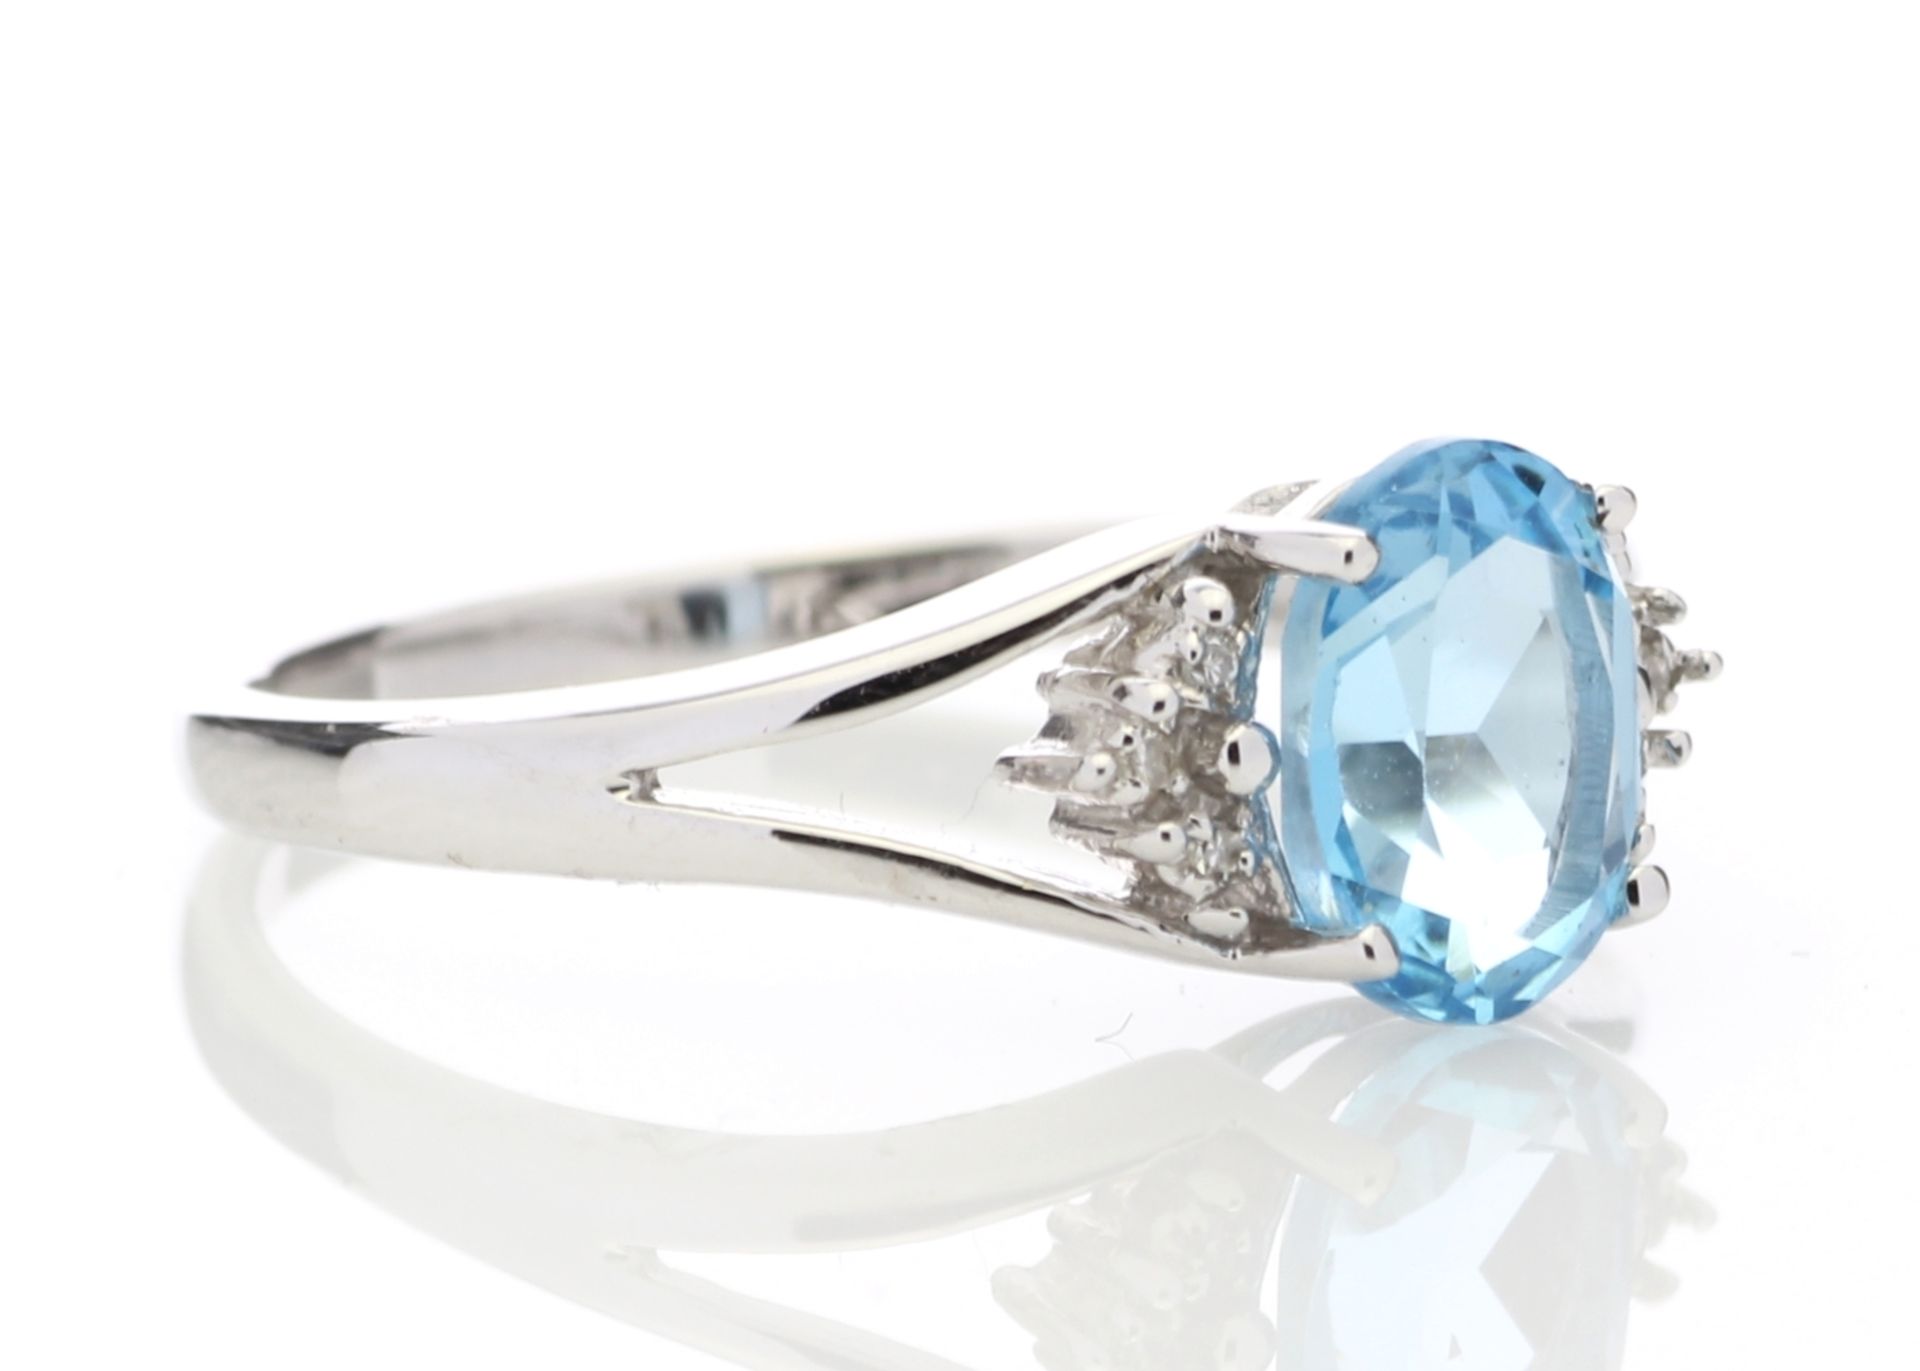 9ct White Gold Diamond And Blue Topaz Ring 0.02 Carats - Image 4 of 6